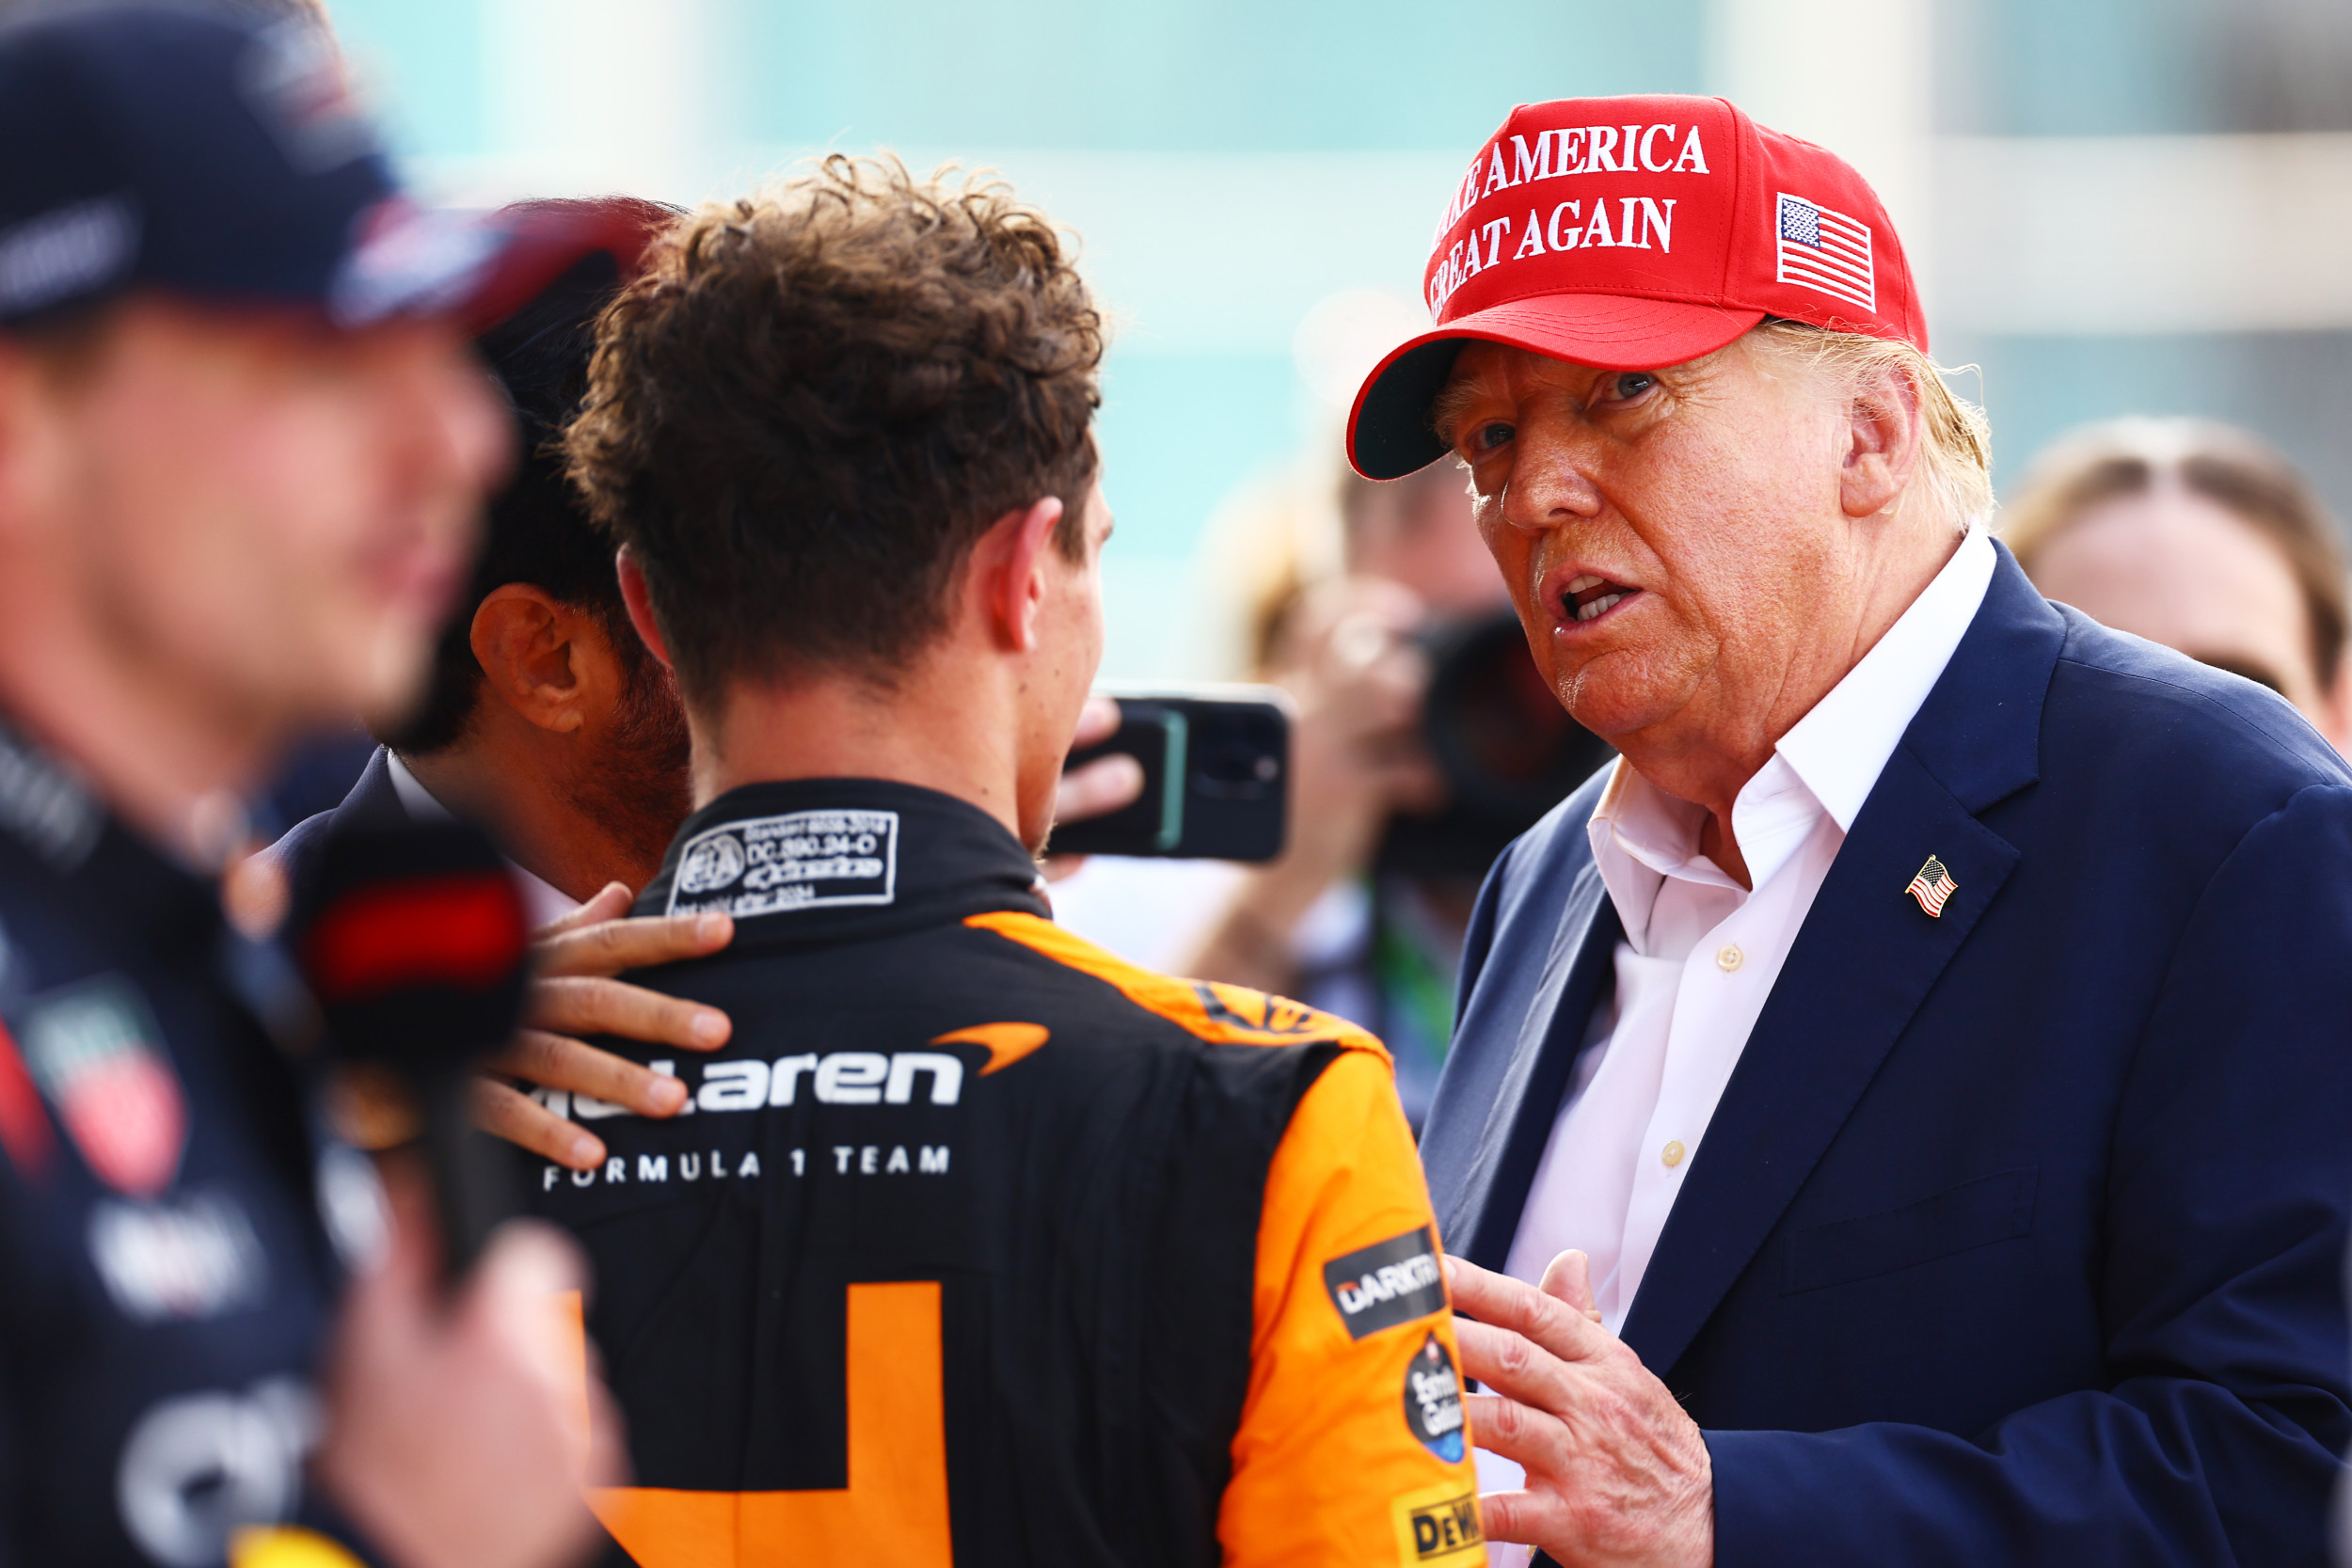 Donald Trump claims he is Lando Norris’s lucky charm after Miami victory